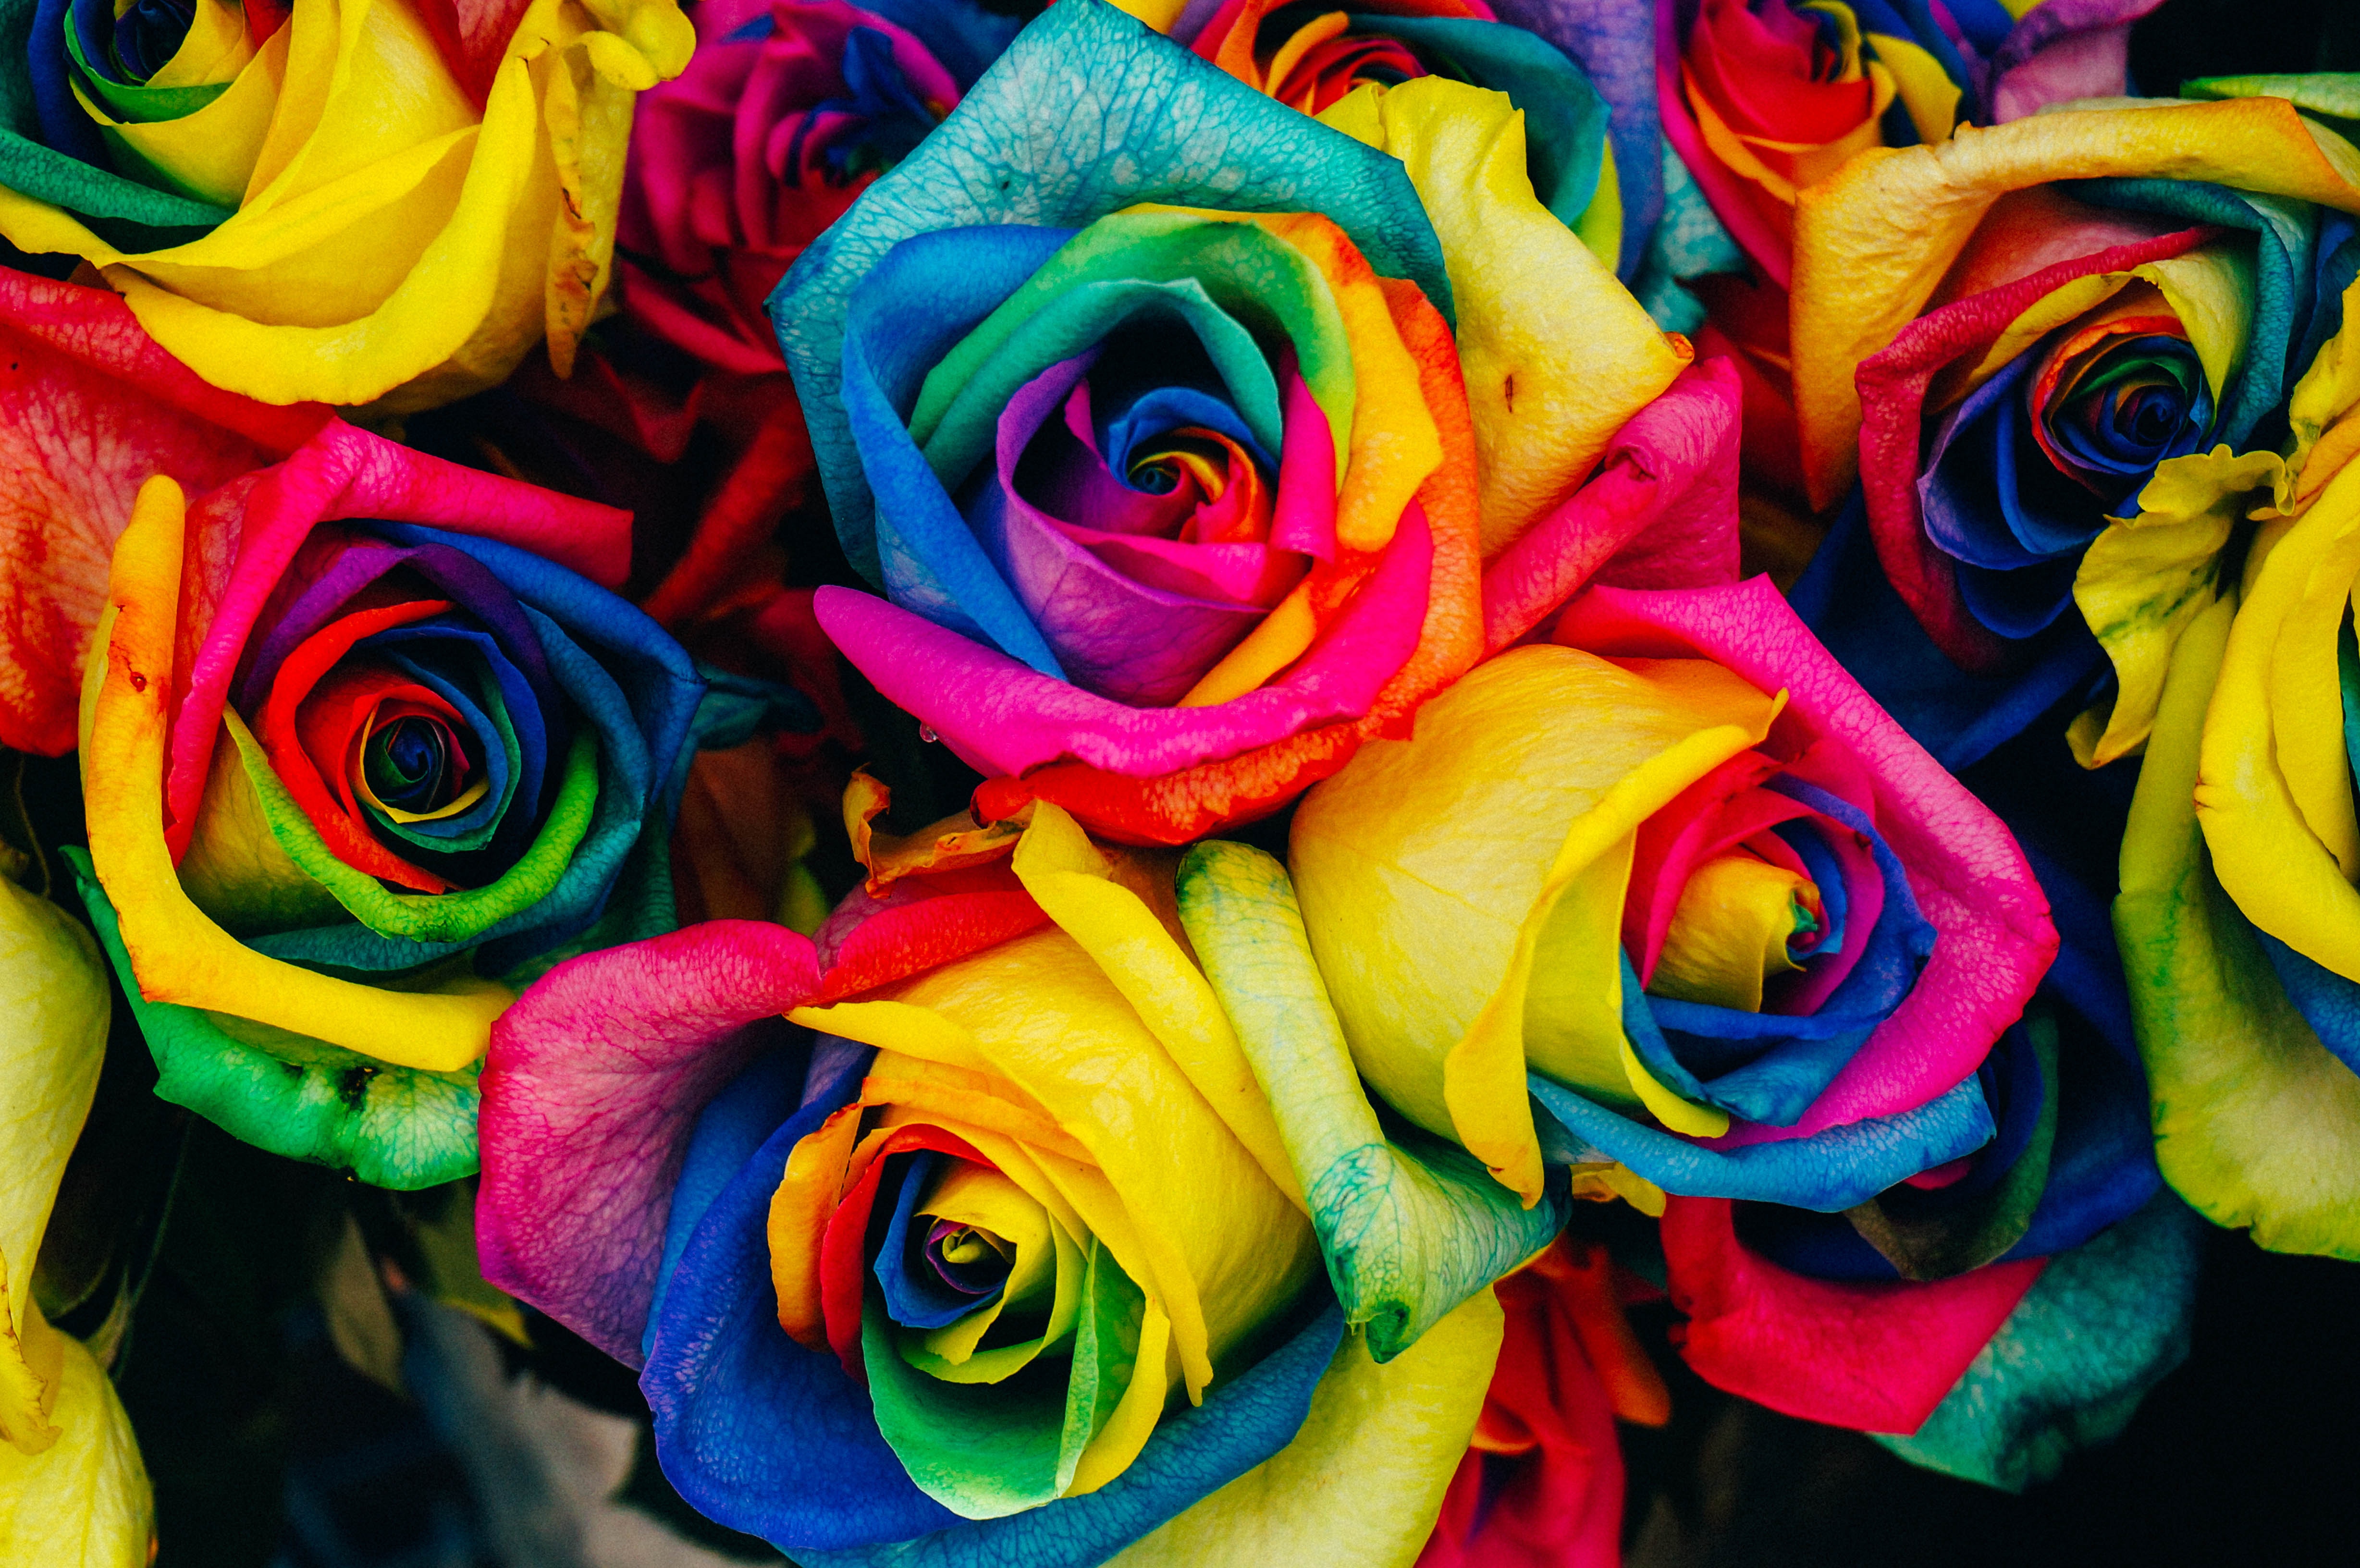 rainbow, roses, motley, flowers, multicolored, iridescent High Definition image